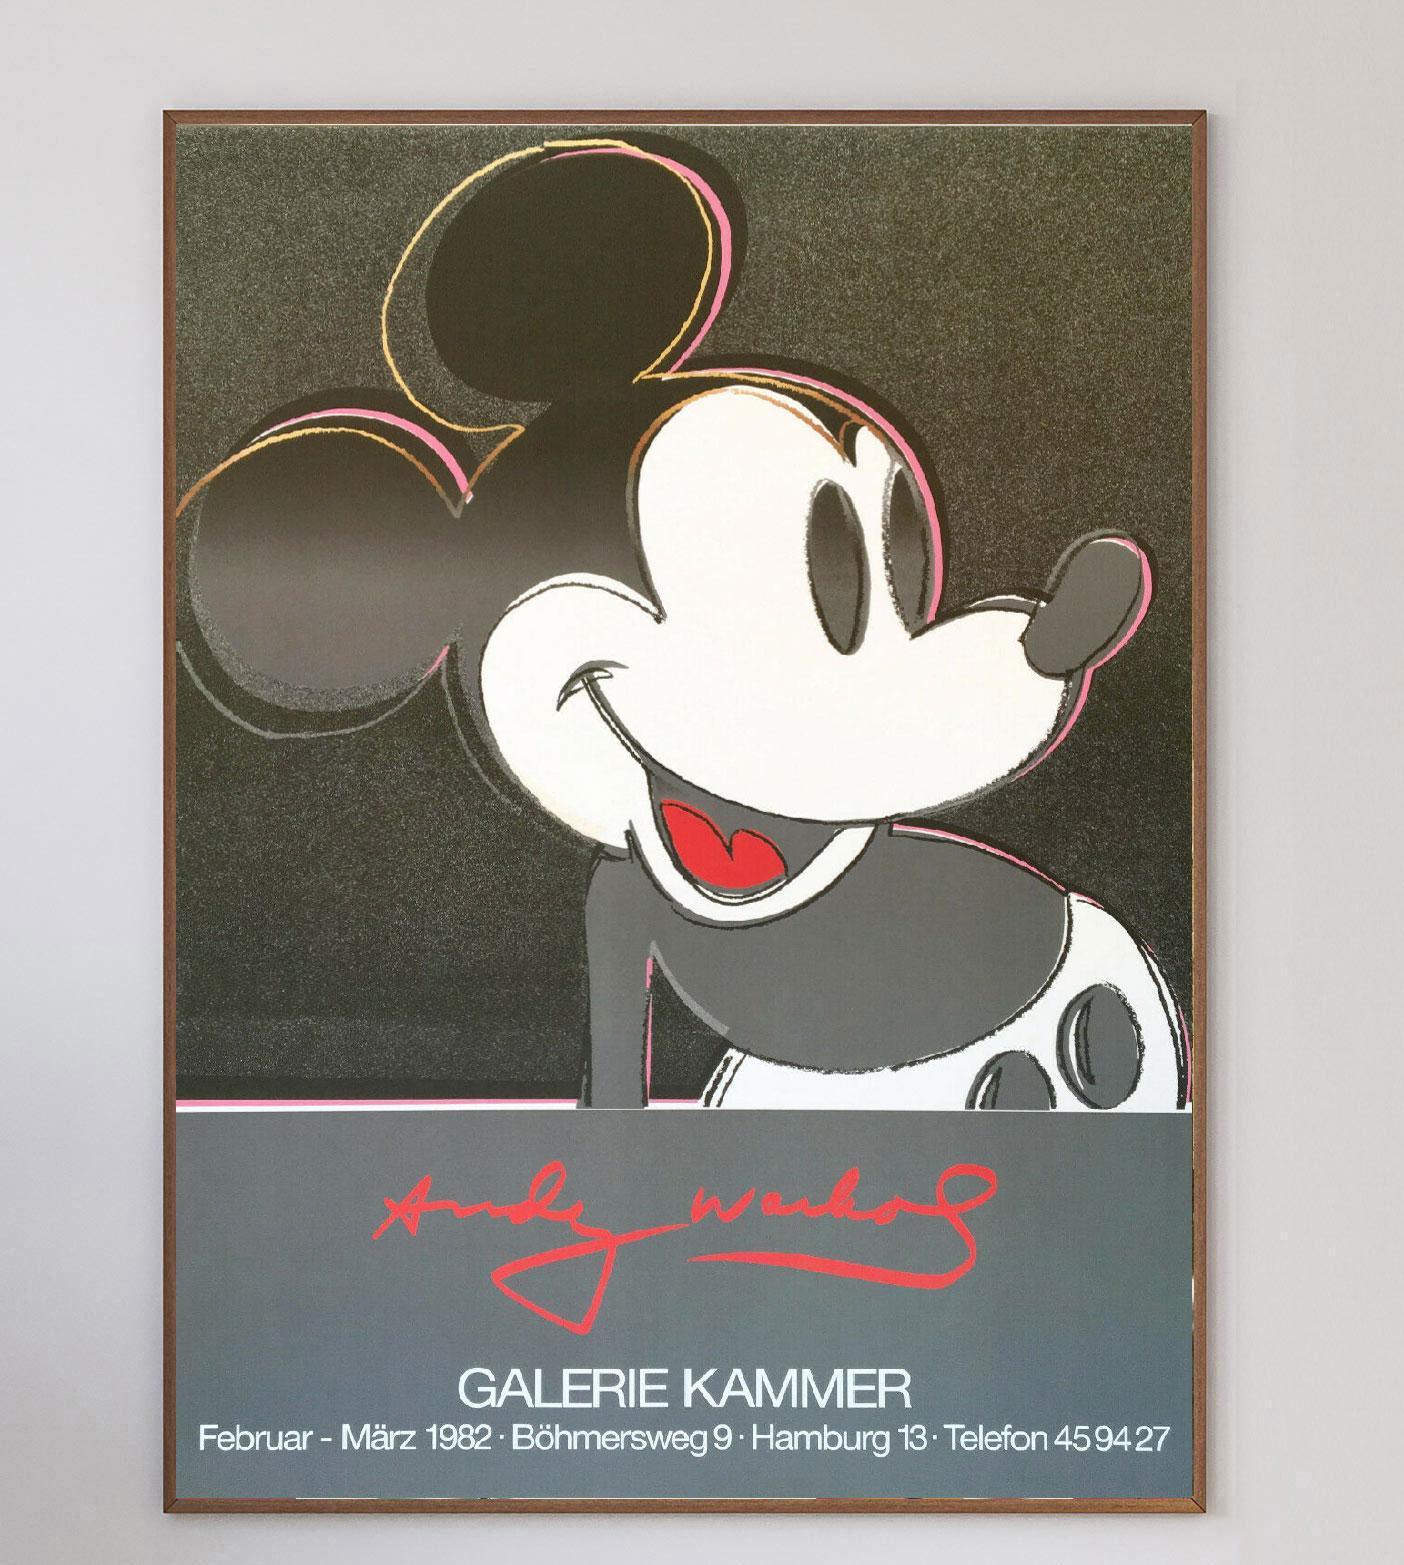 Extremely limited offset-lithograph poster for a 1982 exhibition at the Galerie Kammer in Hamburg, Germany for Andy Warhol. Featuring the iconic design of Warhol's Mickey Mouse, this stunning piece is in mint condition.

With his work centering